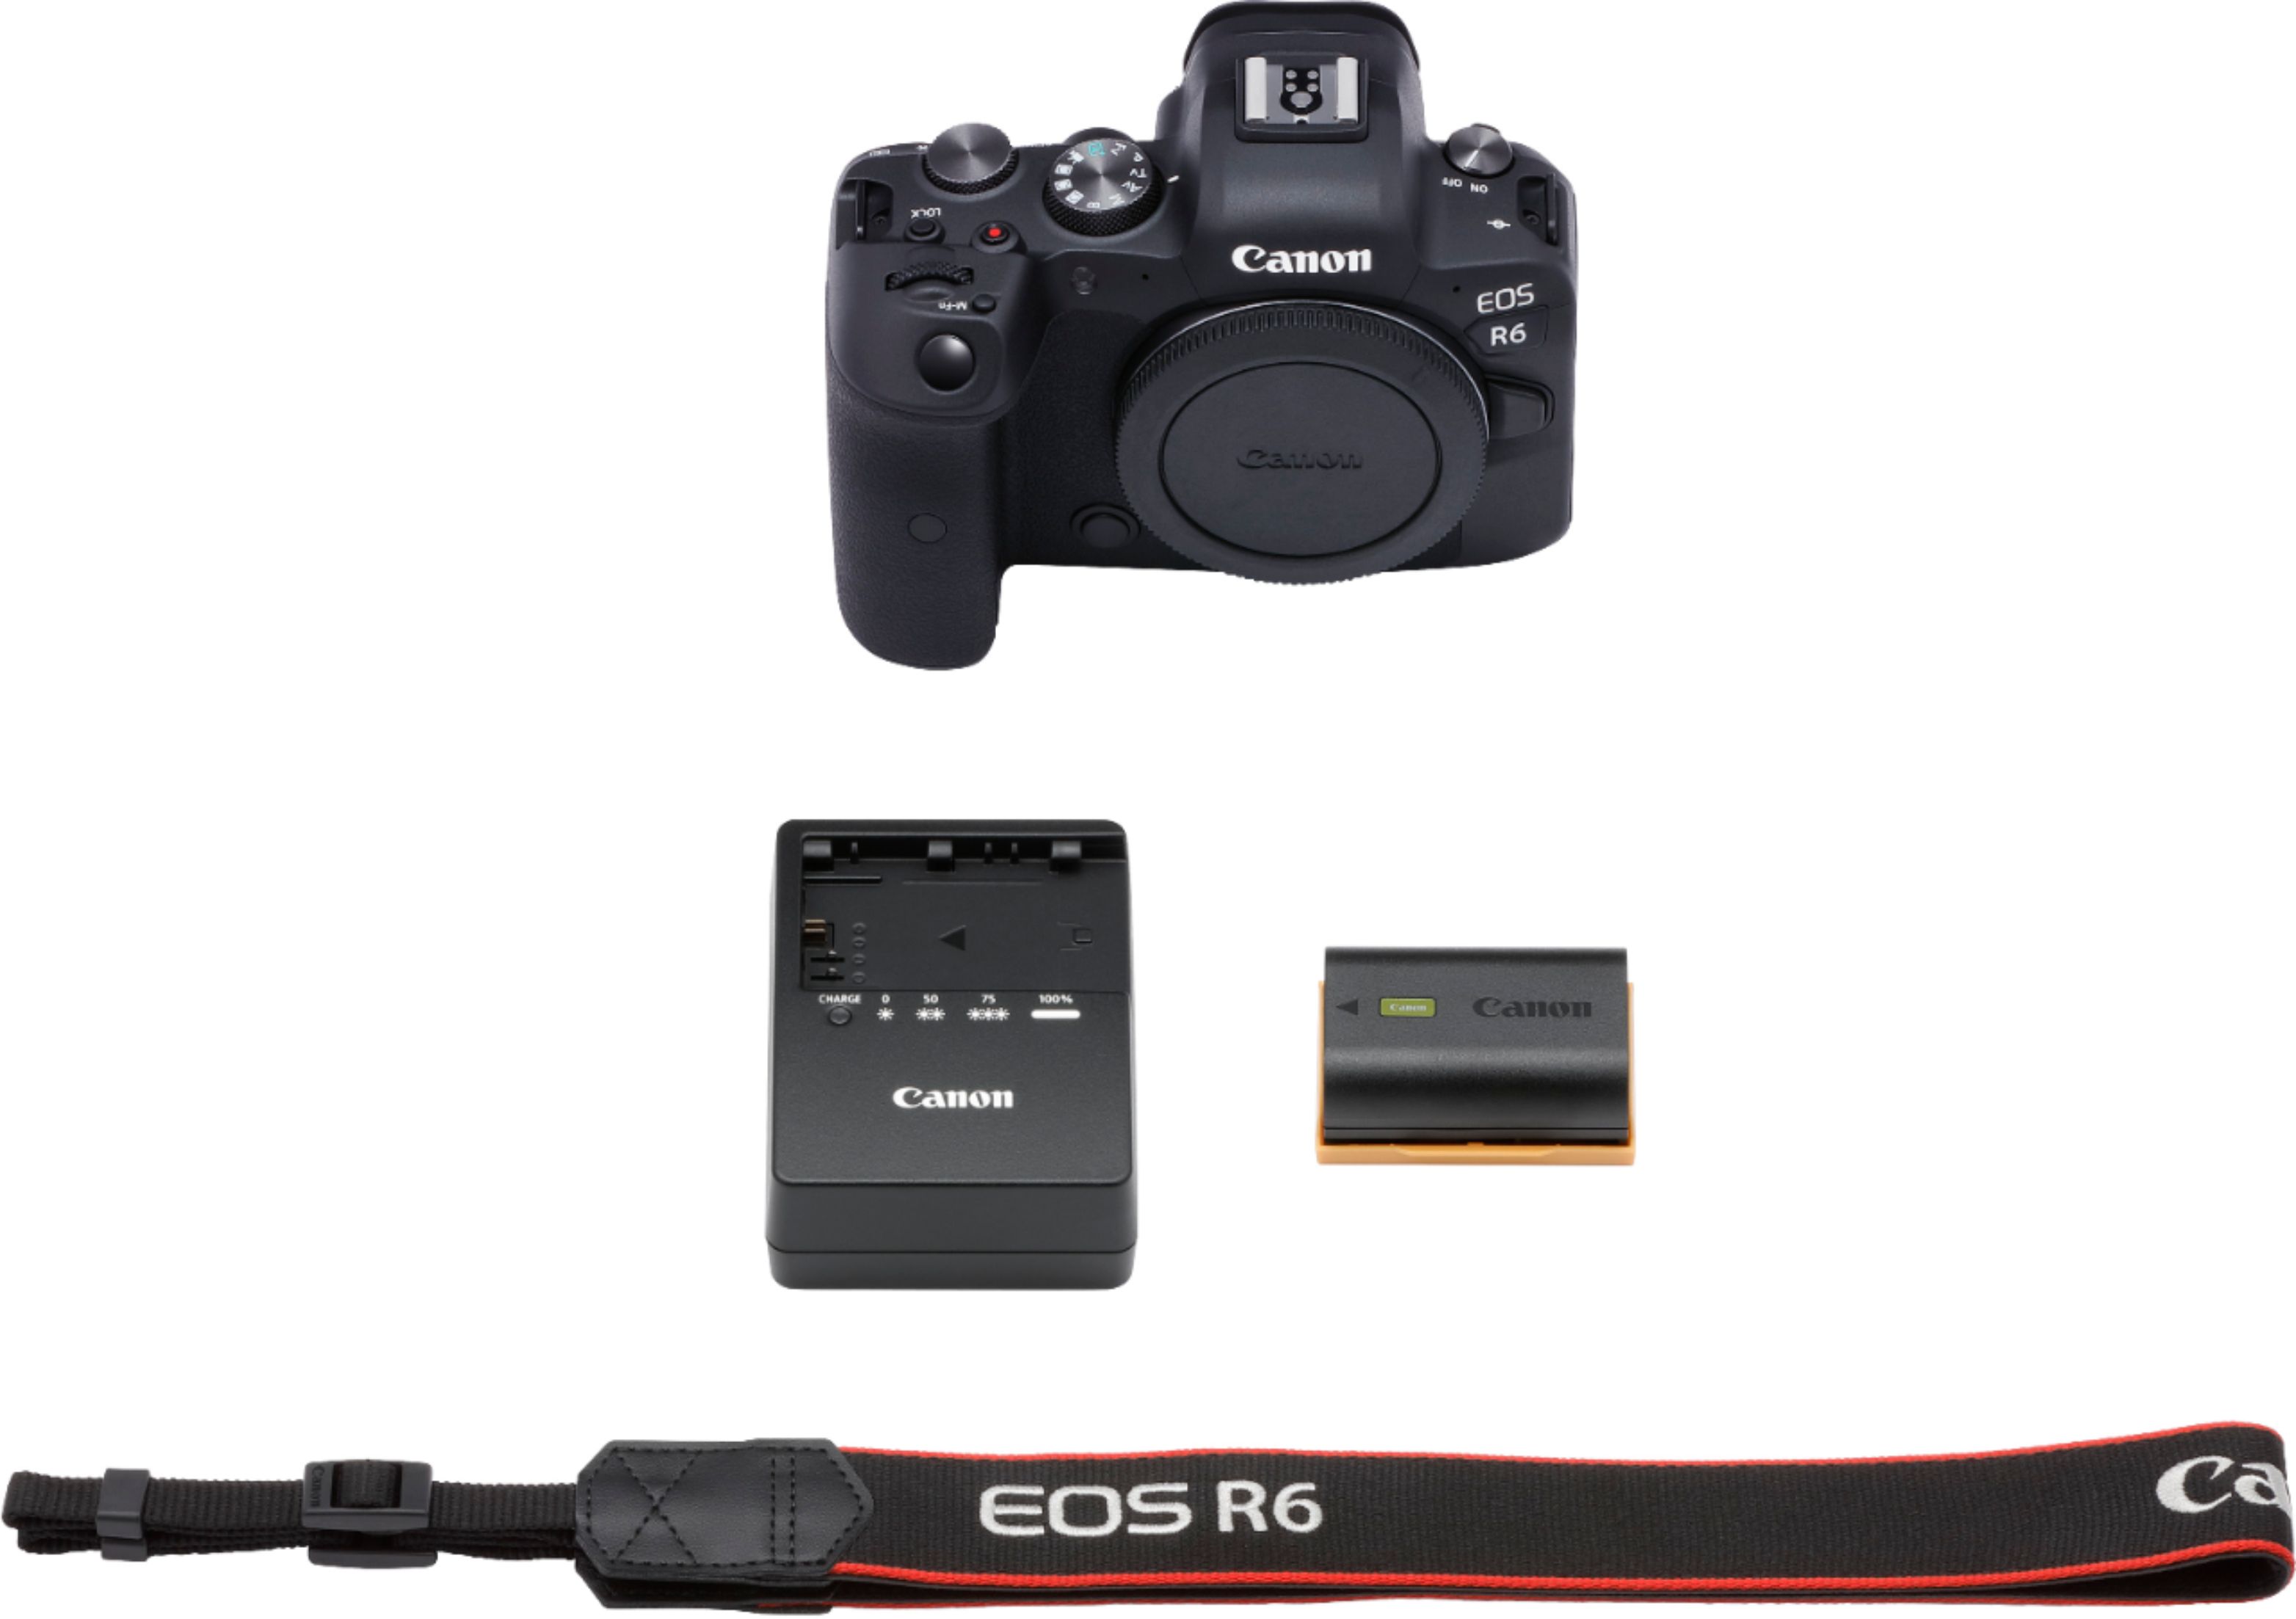 Only) Buy: R6 (Body Mirrorless EOS Camera Black Best 4082C002 Canon